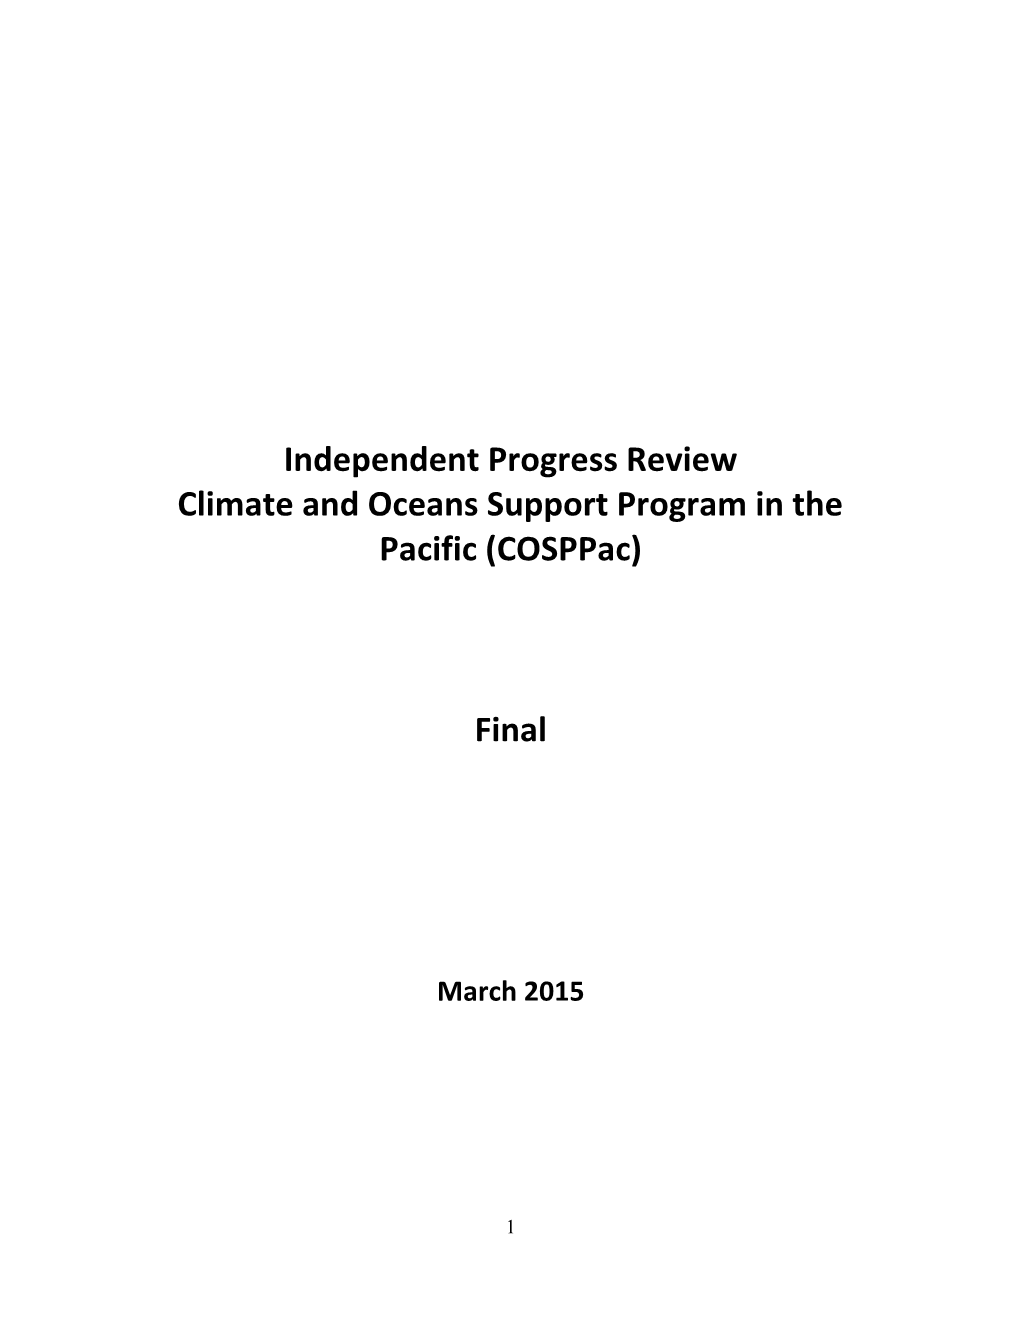 Climate and Oceans Support Program in the Pacific (Cosppac)